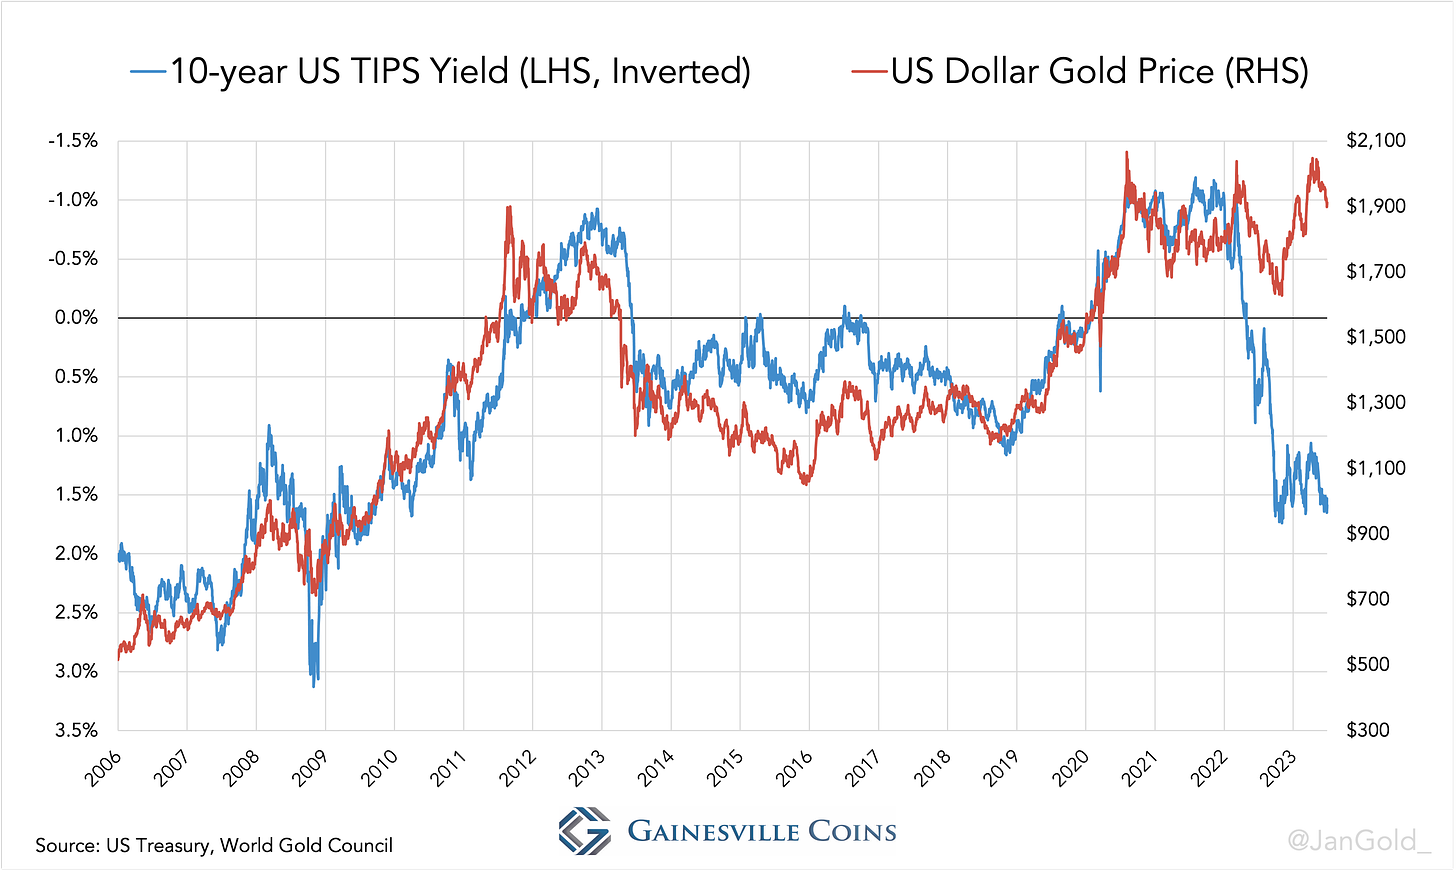 Chart showing the relationship between the gold price and 10-year TIPS yield